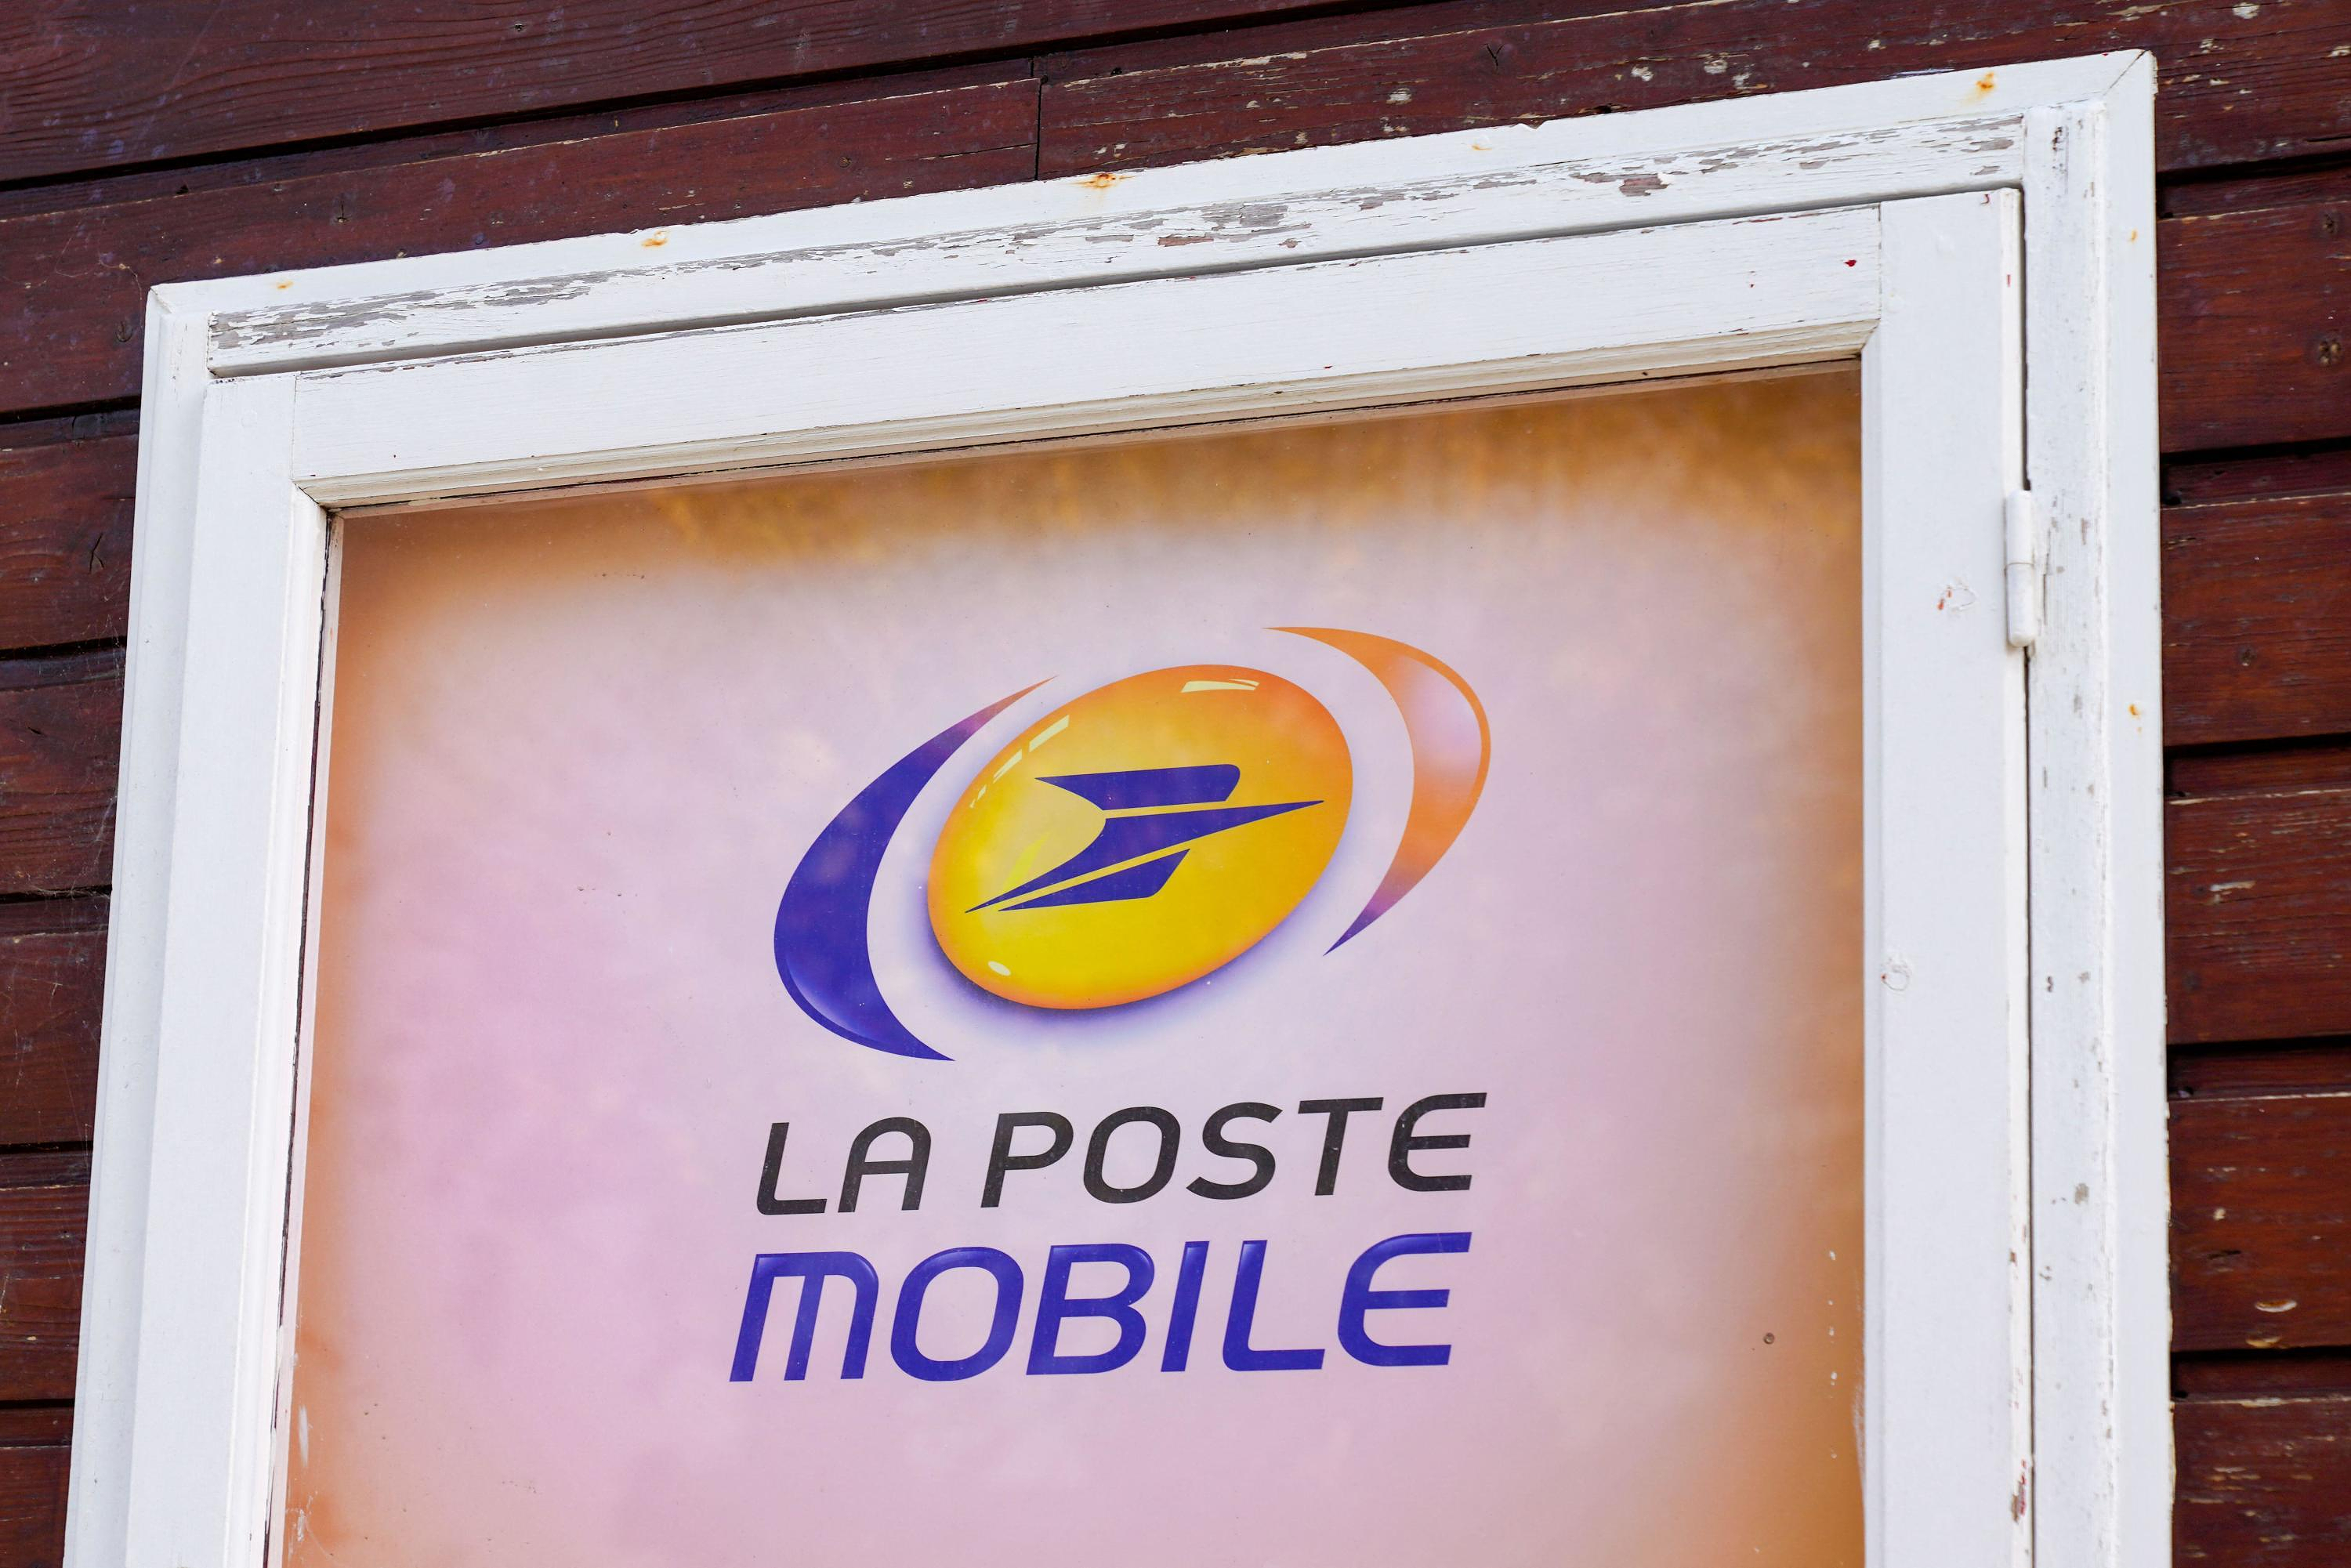 La Poste Mobile for sale: what impact for its 2 million customers?